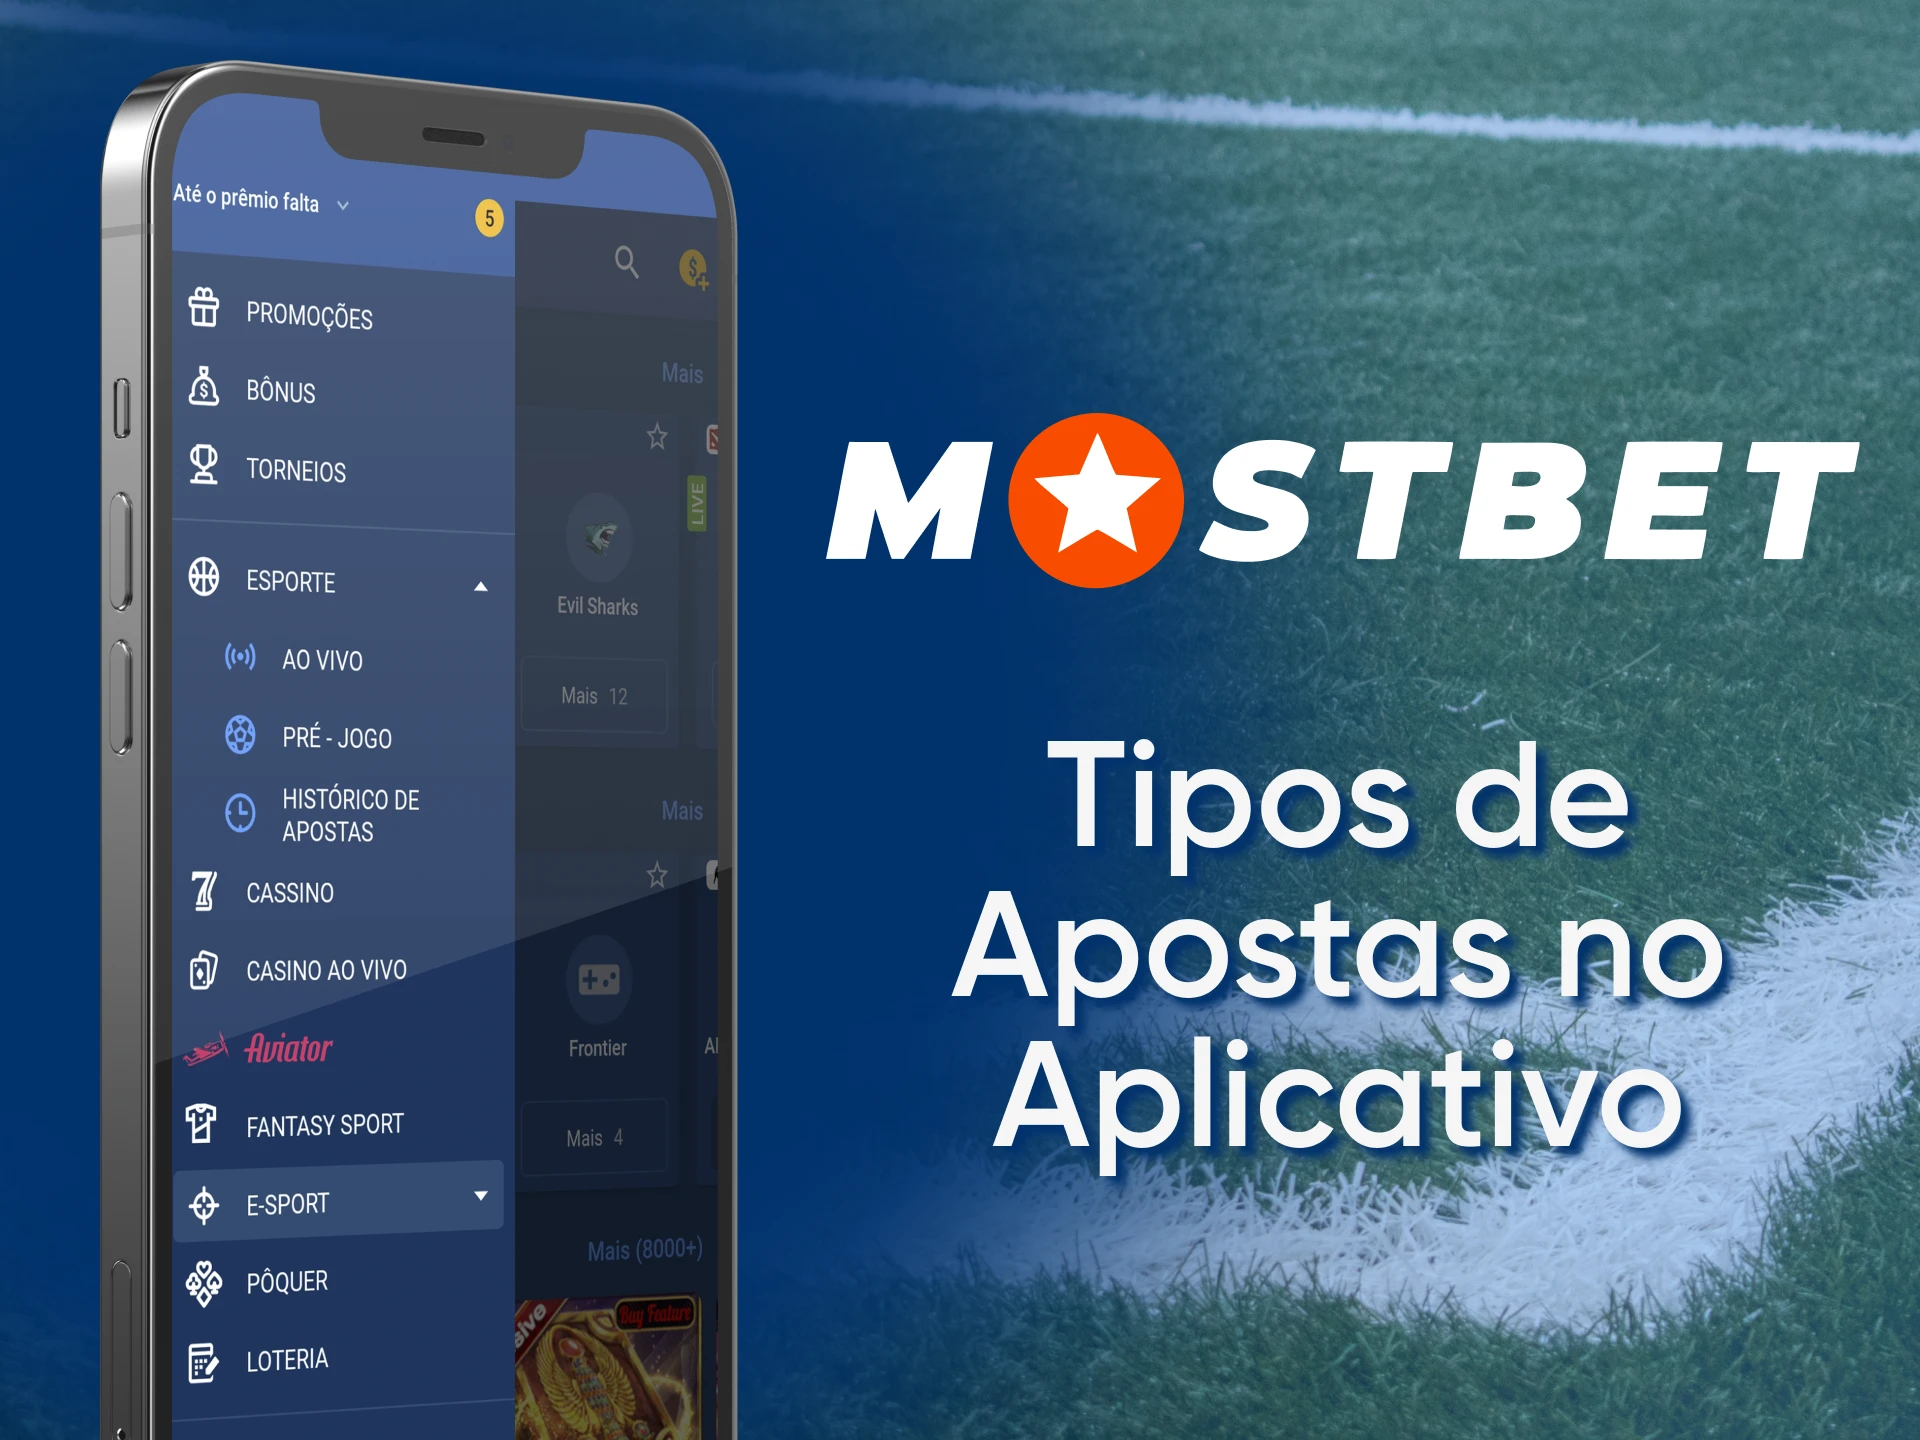 Place different types of bets on Mostbet, read its description.